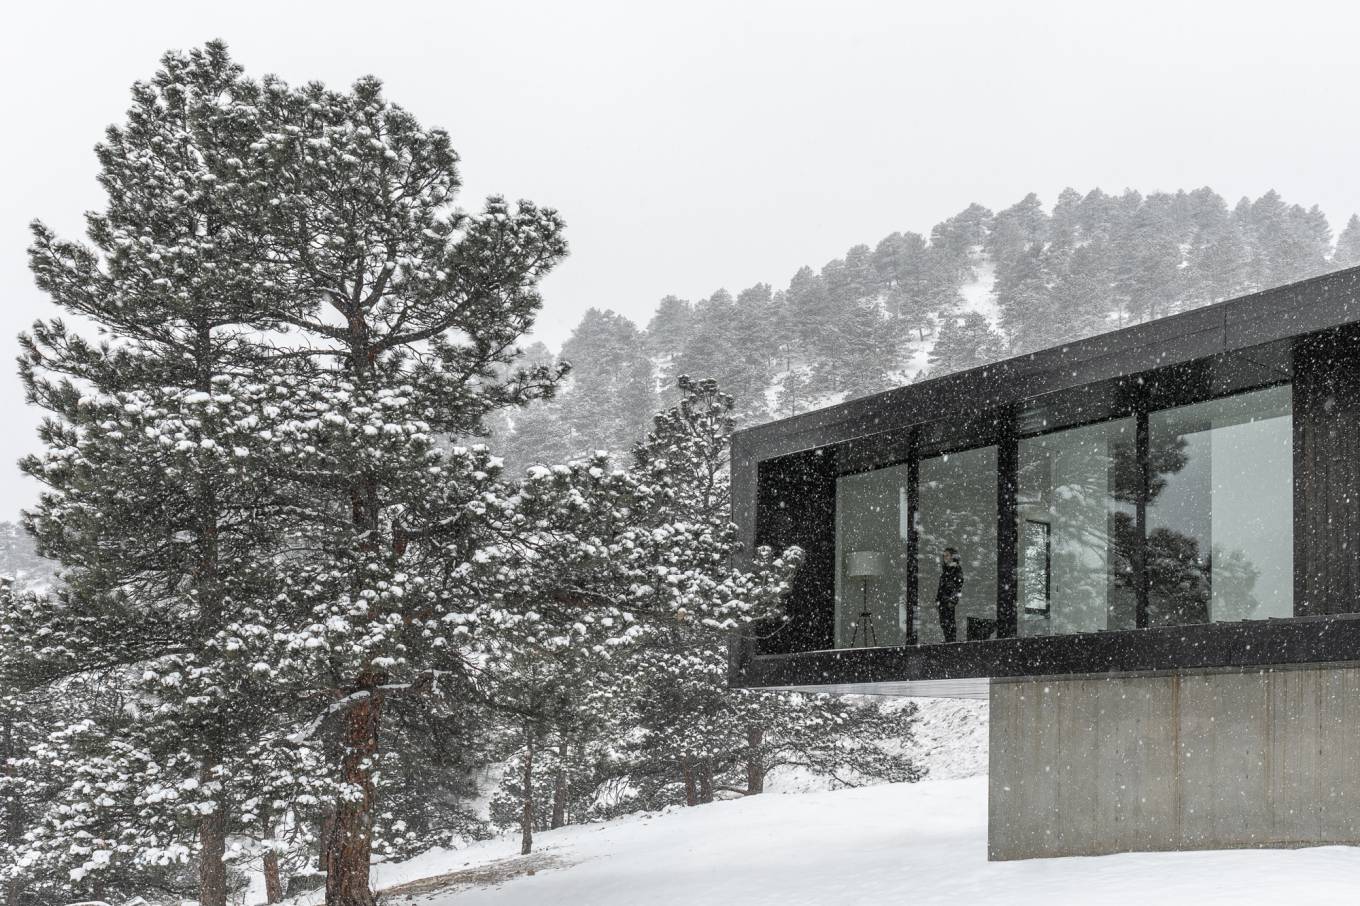 The homes facade is sheathed in a glossy metal to reflect the landscape while staying durable and fire resistant, countering the harsh mountain environment